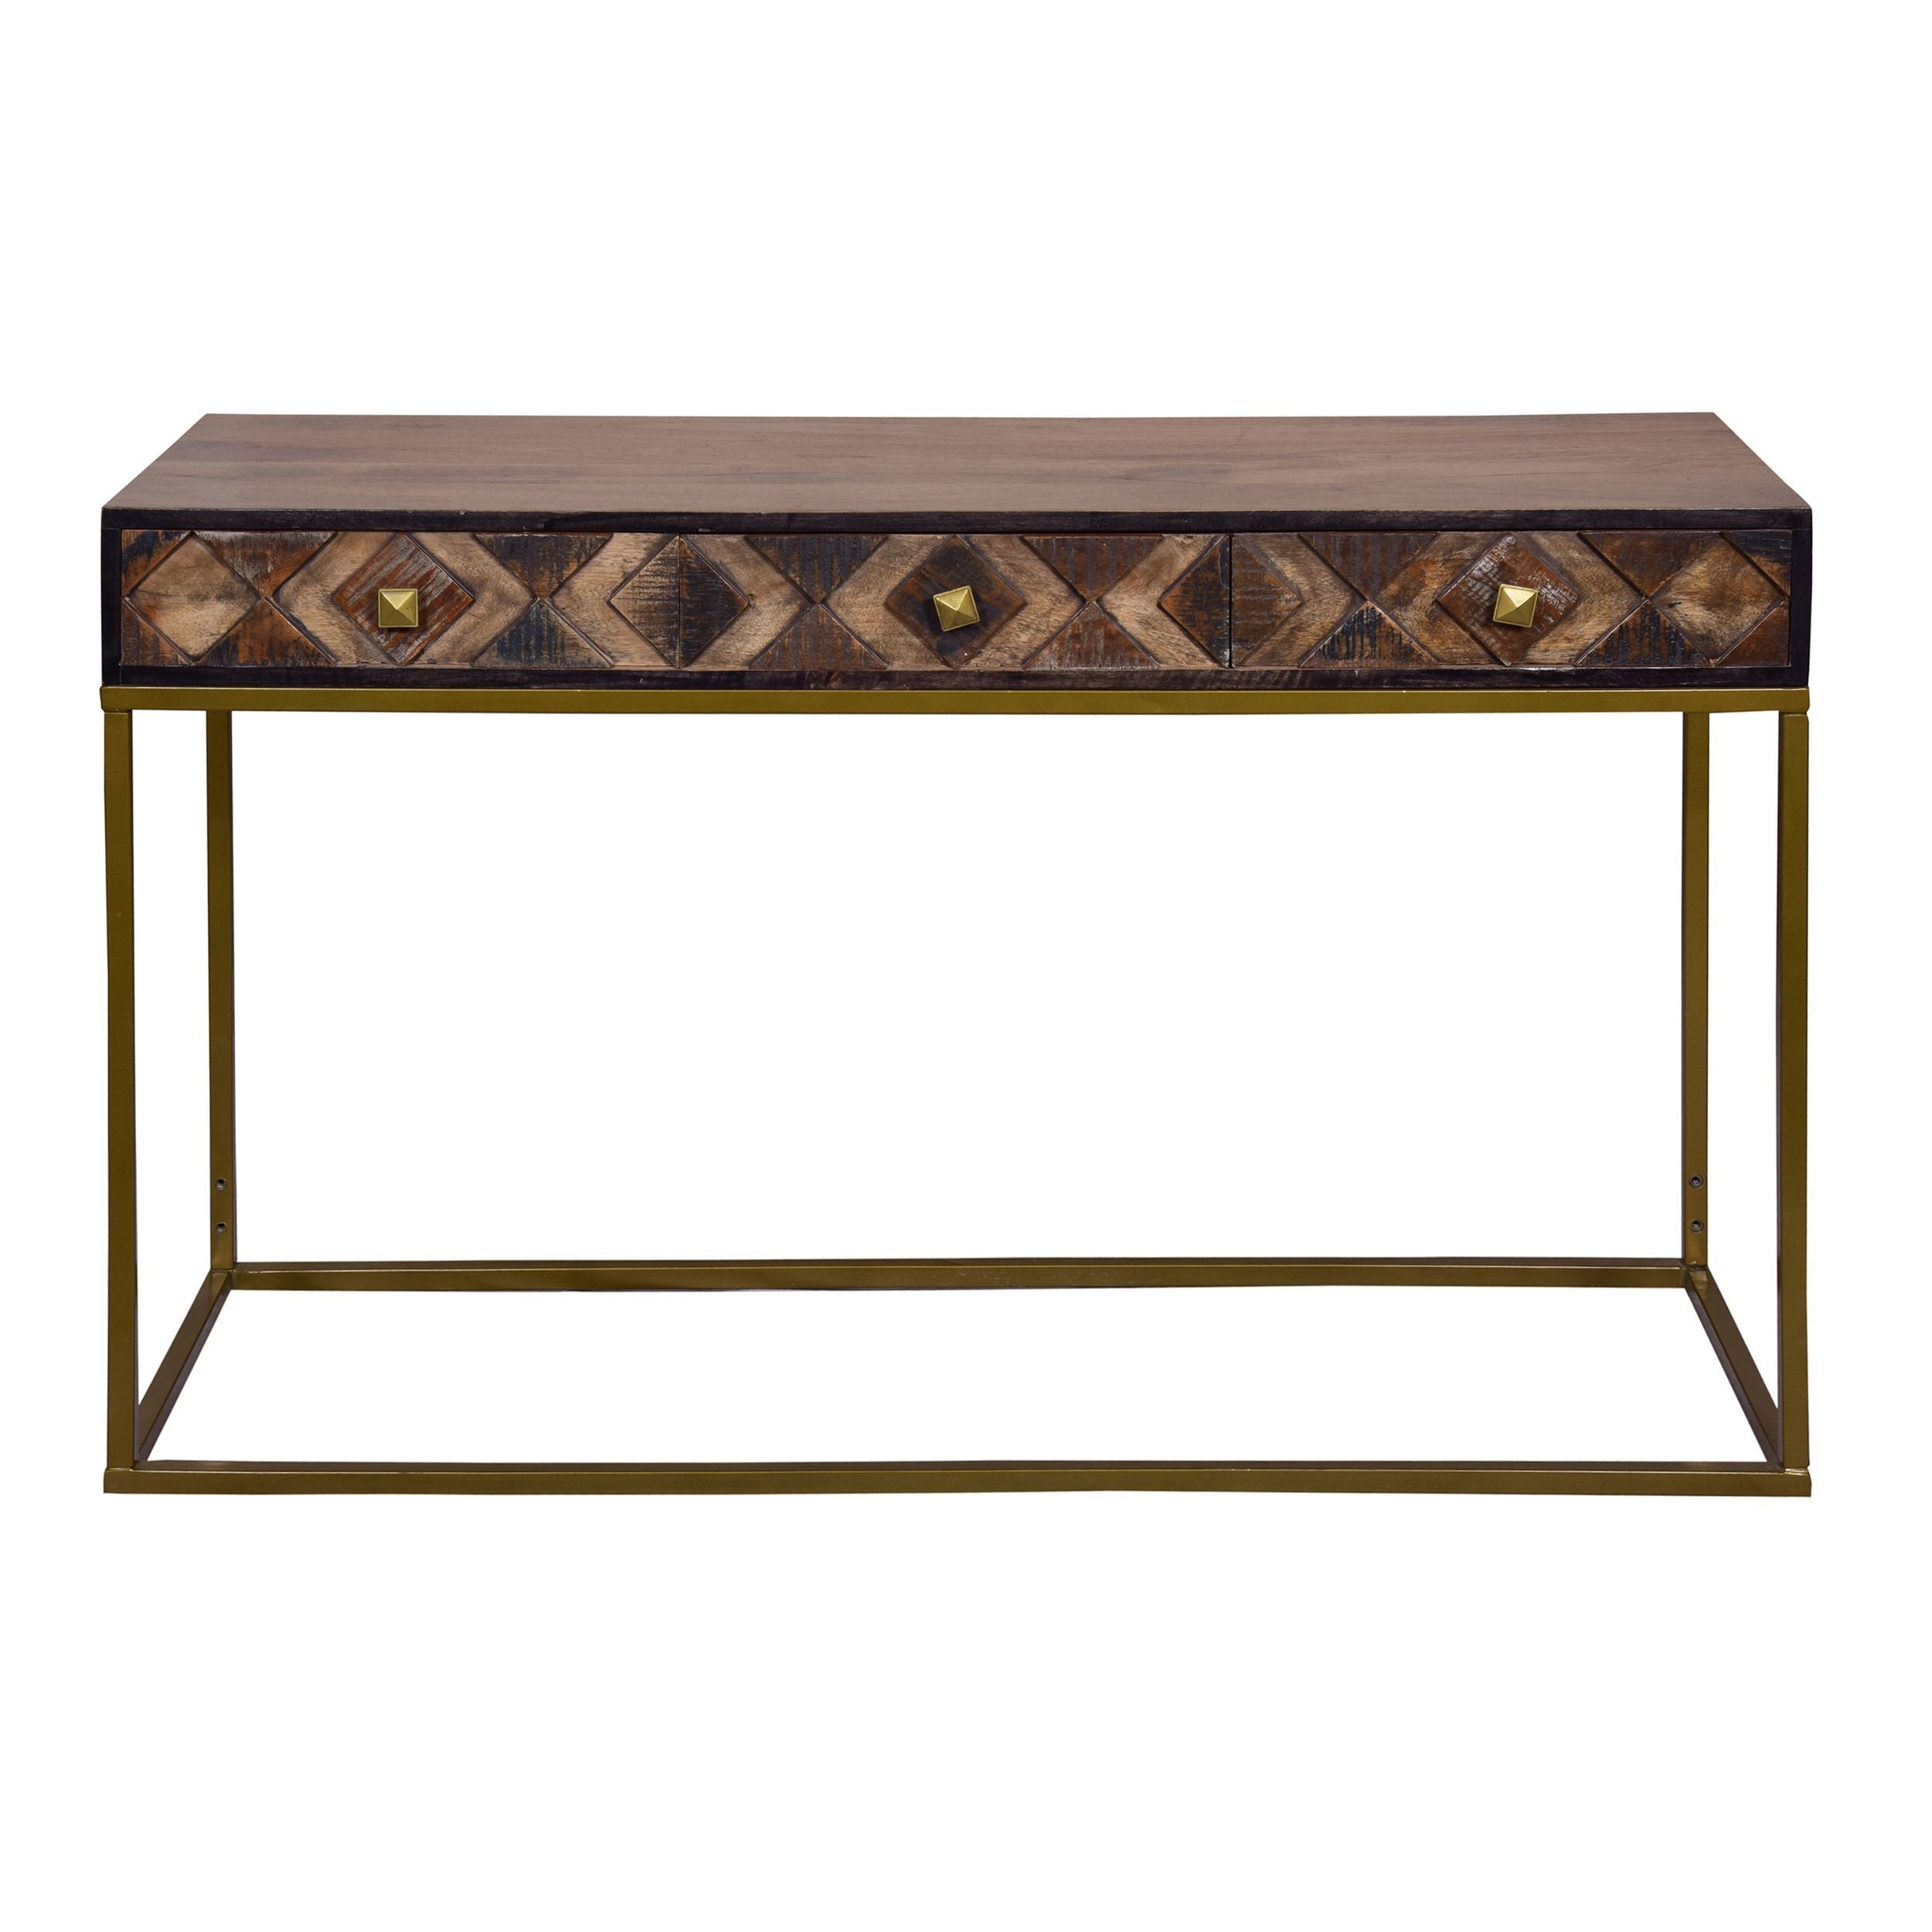 3-drawer console table